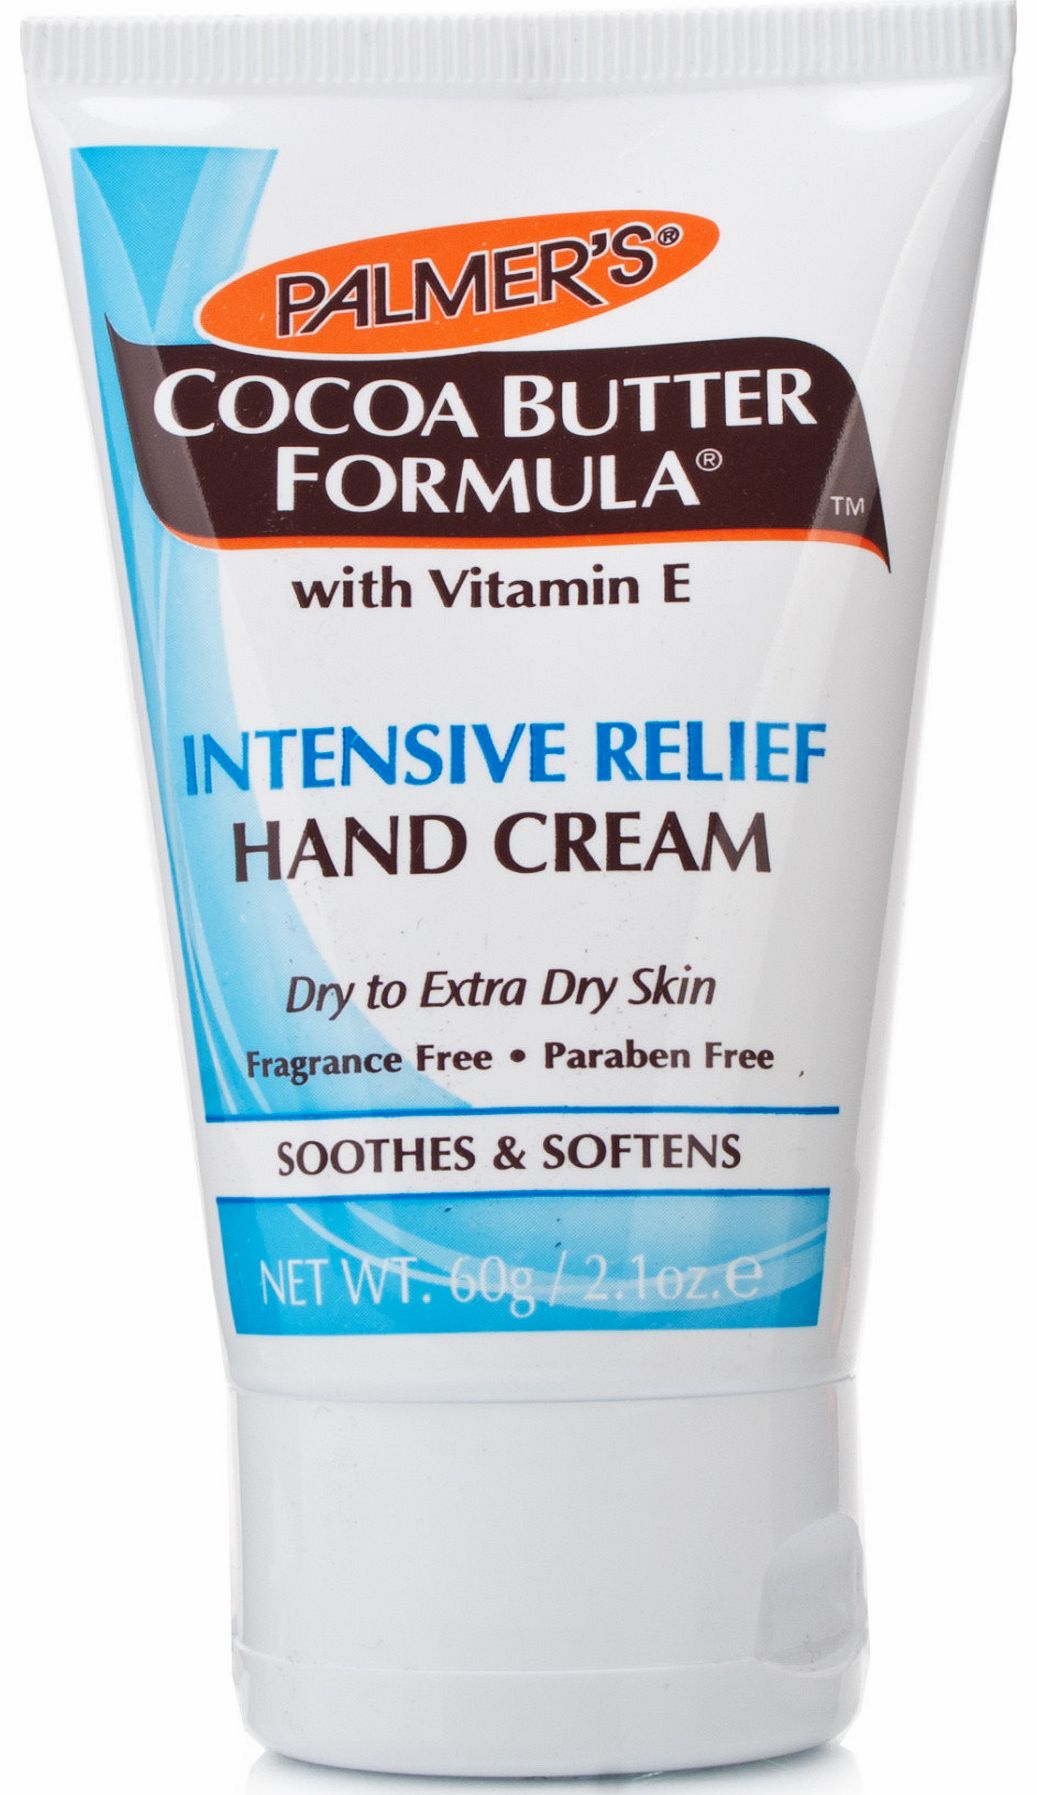 Palmers Intensive Relief Hand Cream